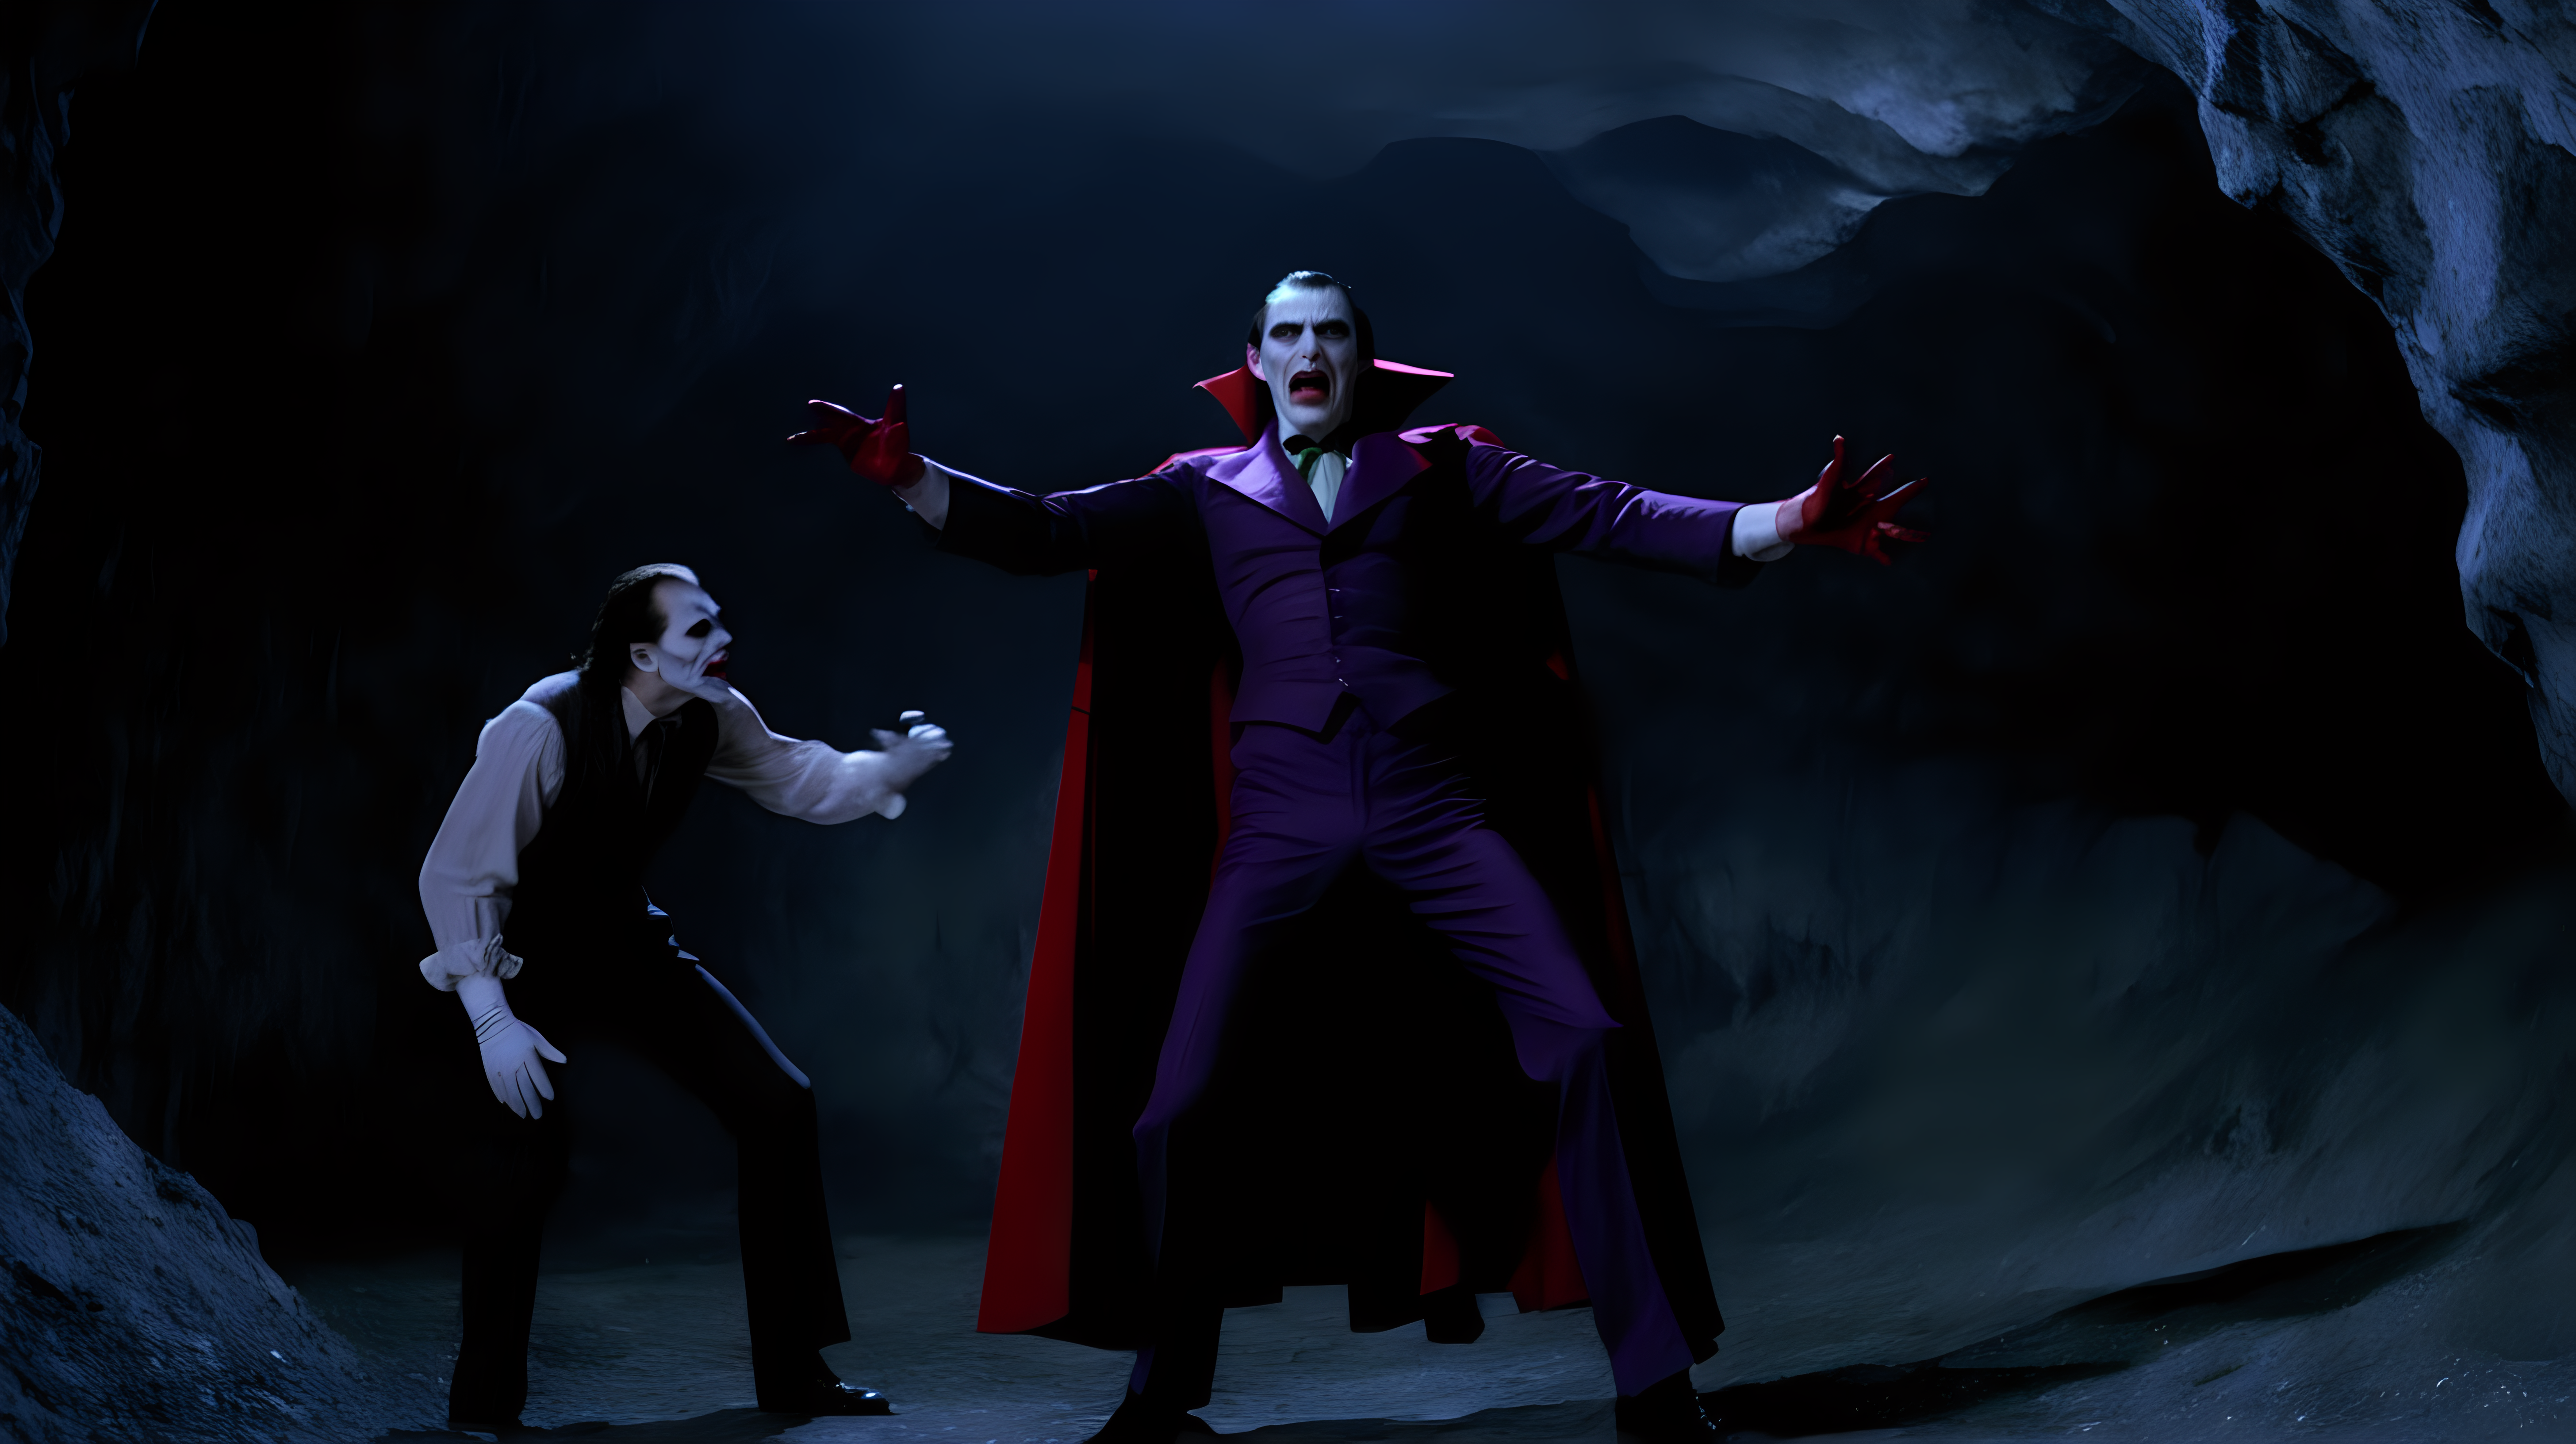 Dracula fights the joker in a cave